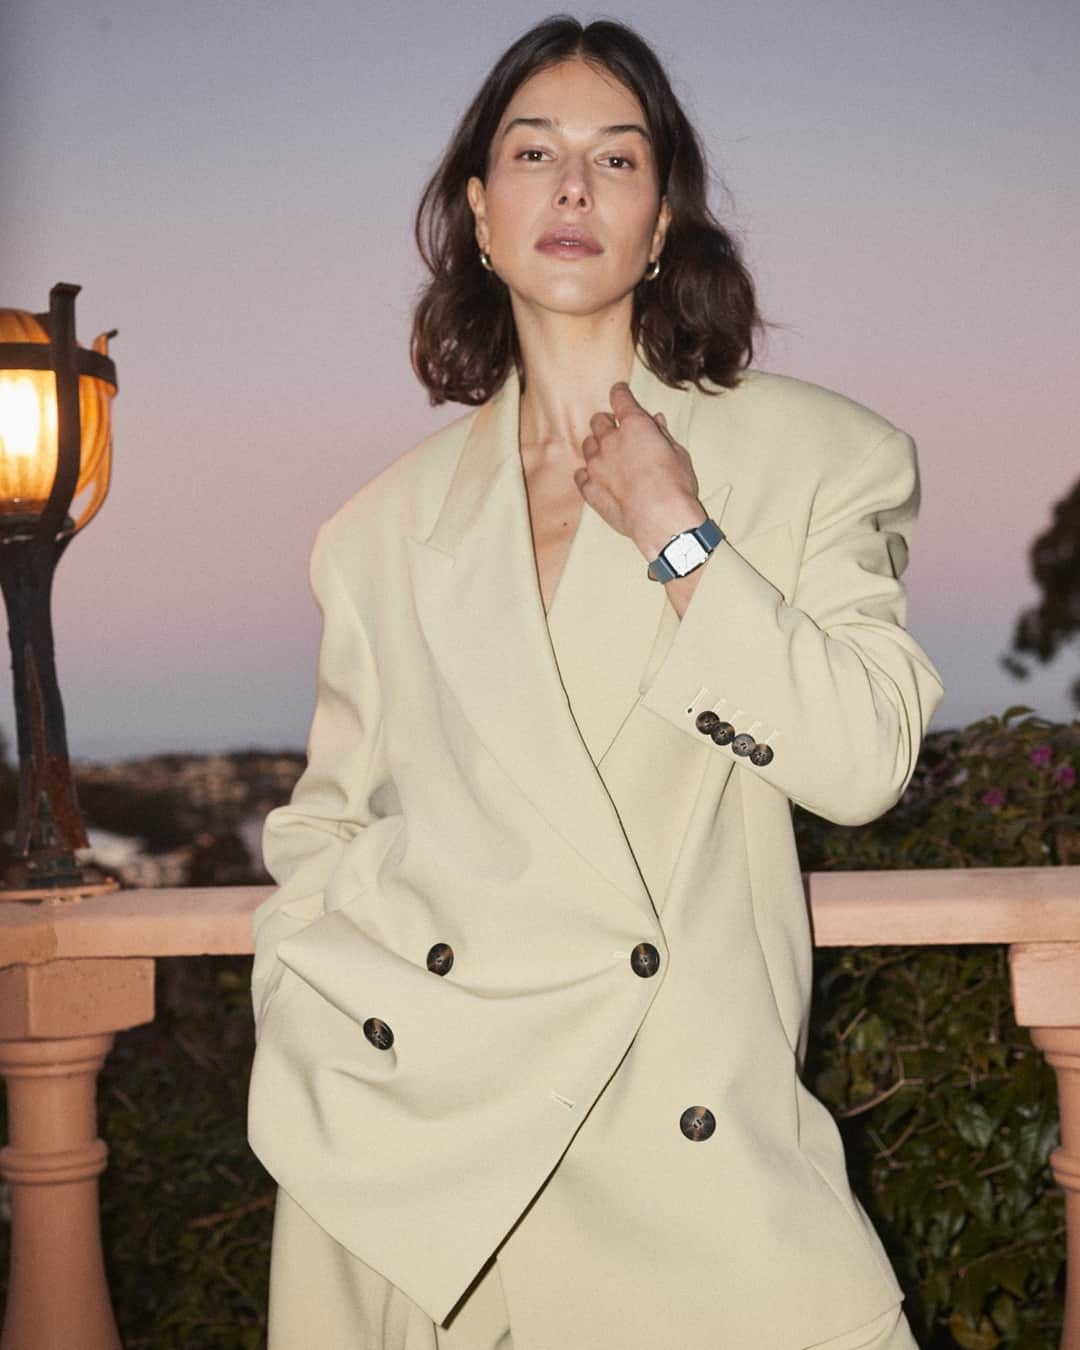 The Horseのインスタグラム：「Make a statement with the Dress Watch | Discover all the colourways at thehorse.com.au」